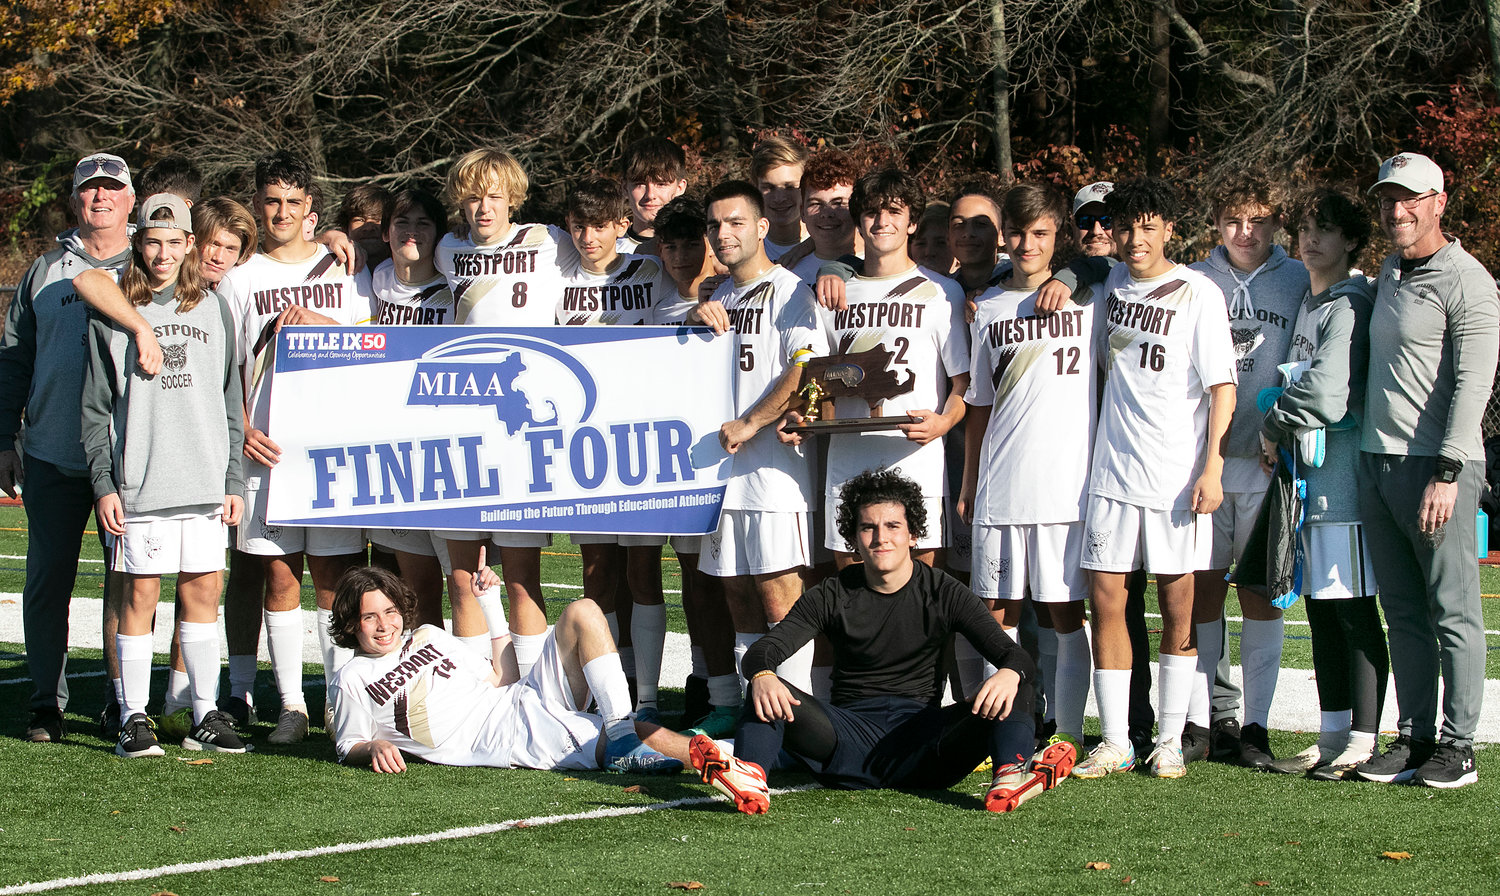 The team poses with the final four banner and trophy.